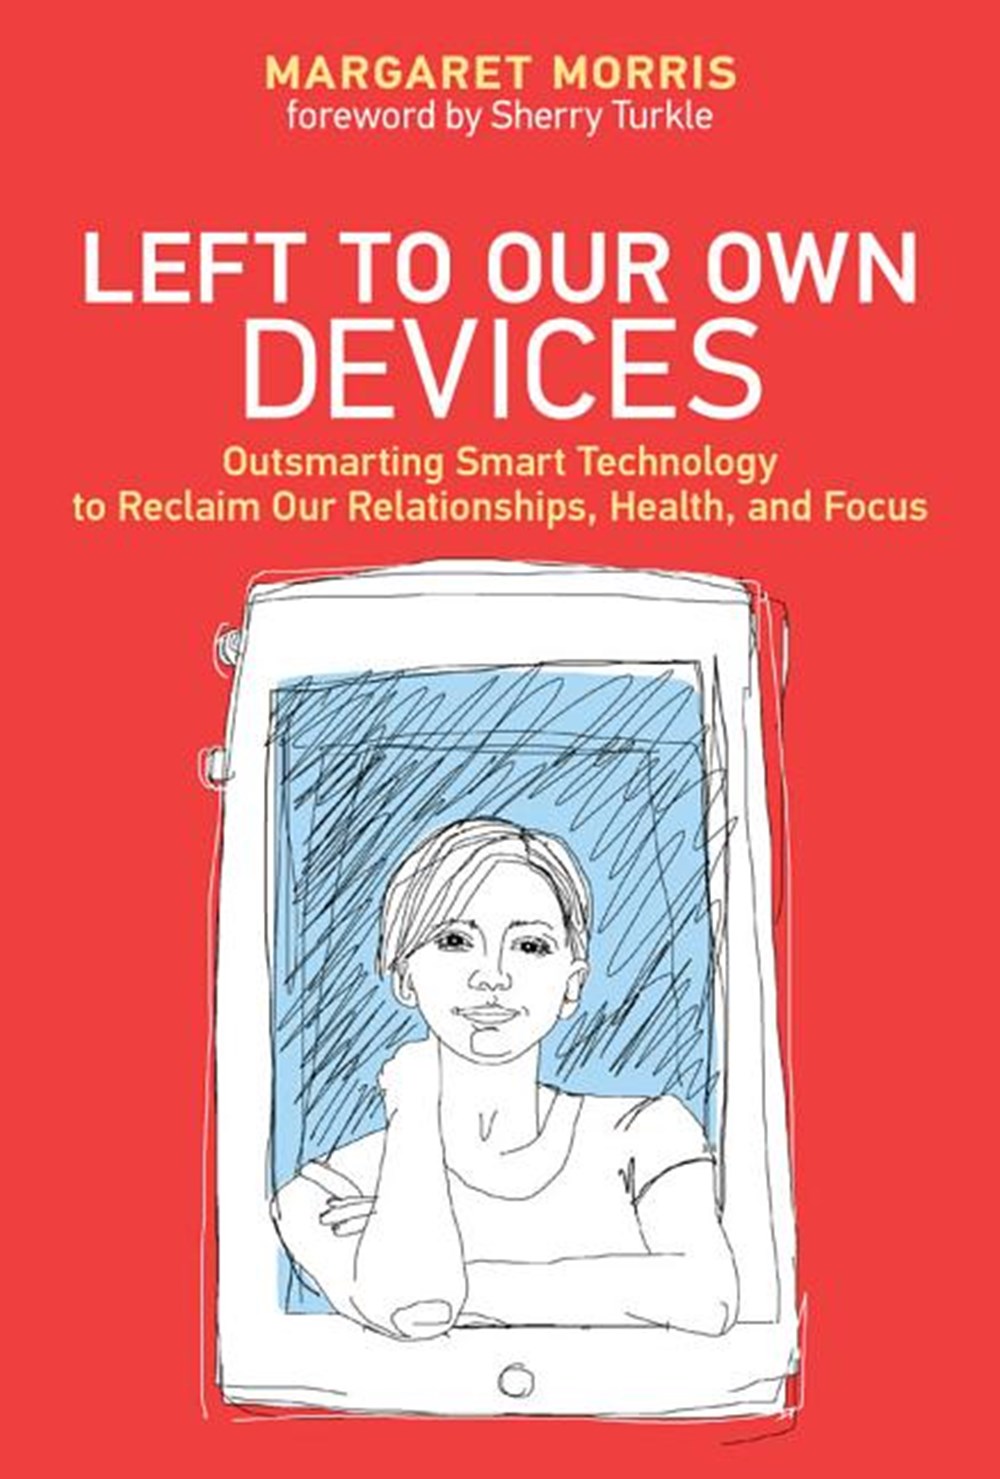 Left to Our Own Devices Outsmarting Smart Technology to Reclaim Our Relationships, Health, and Focus